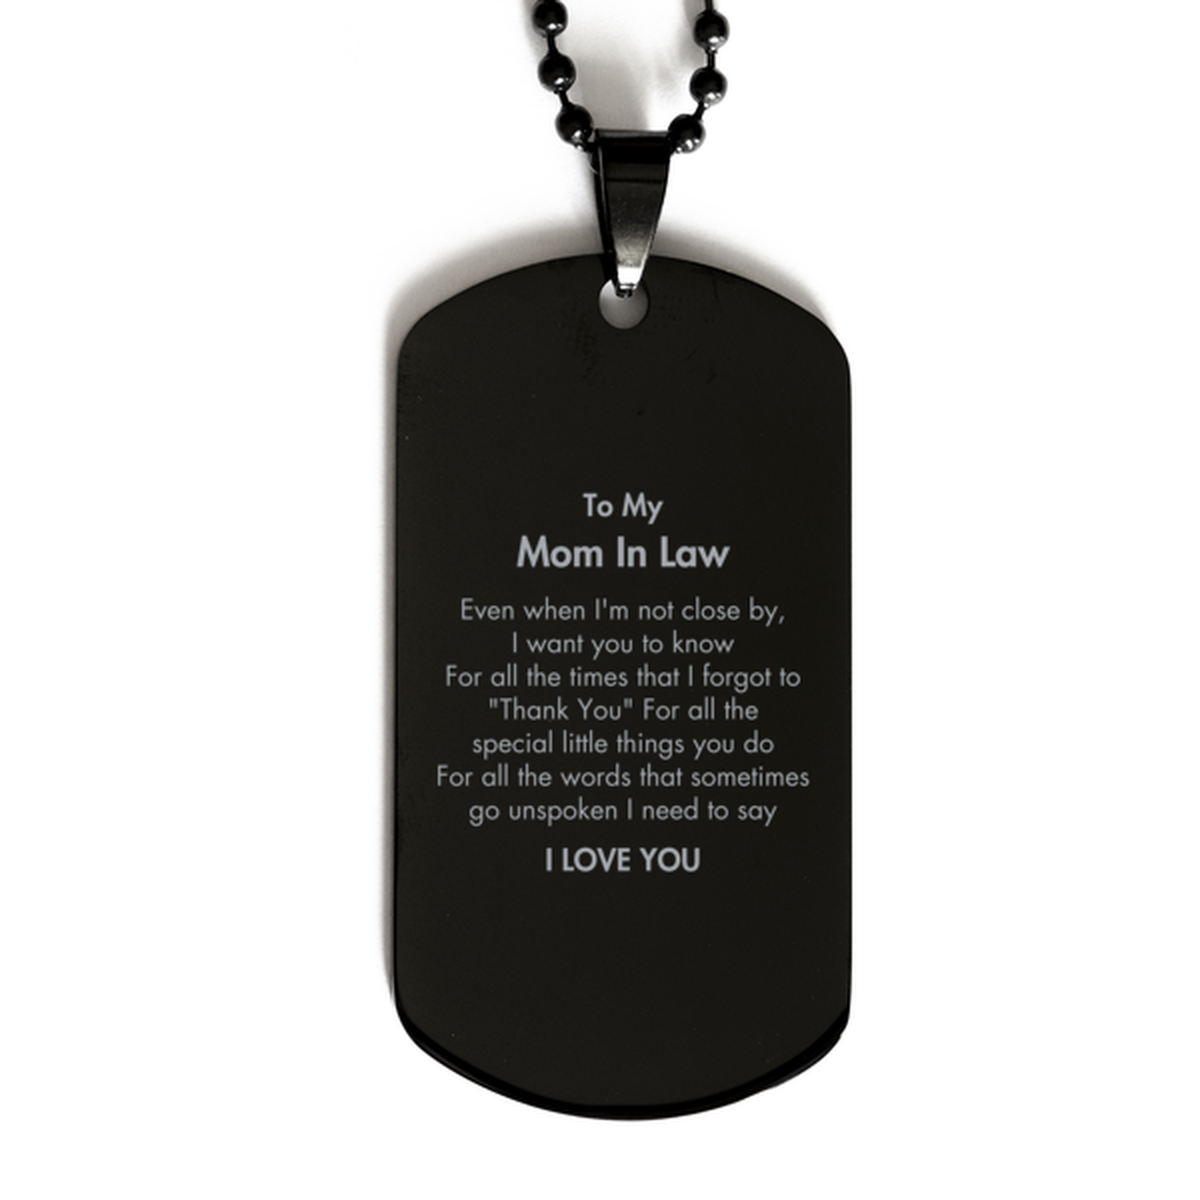 Thank You Gifts for Mom In Law, Keepsake Black Dog Tag Gifts for Mom In Law Birthday Mother's day Father's Day Mom In Law For all the words That sometimes go unspoken I need to say I LOVE YOU